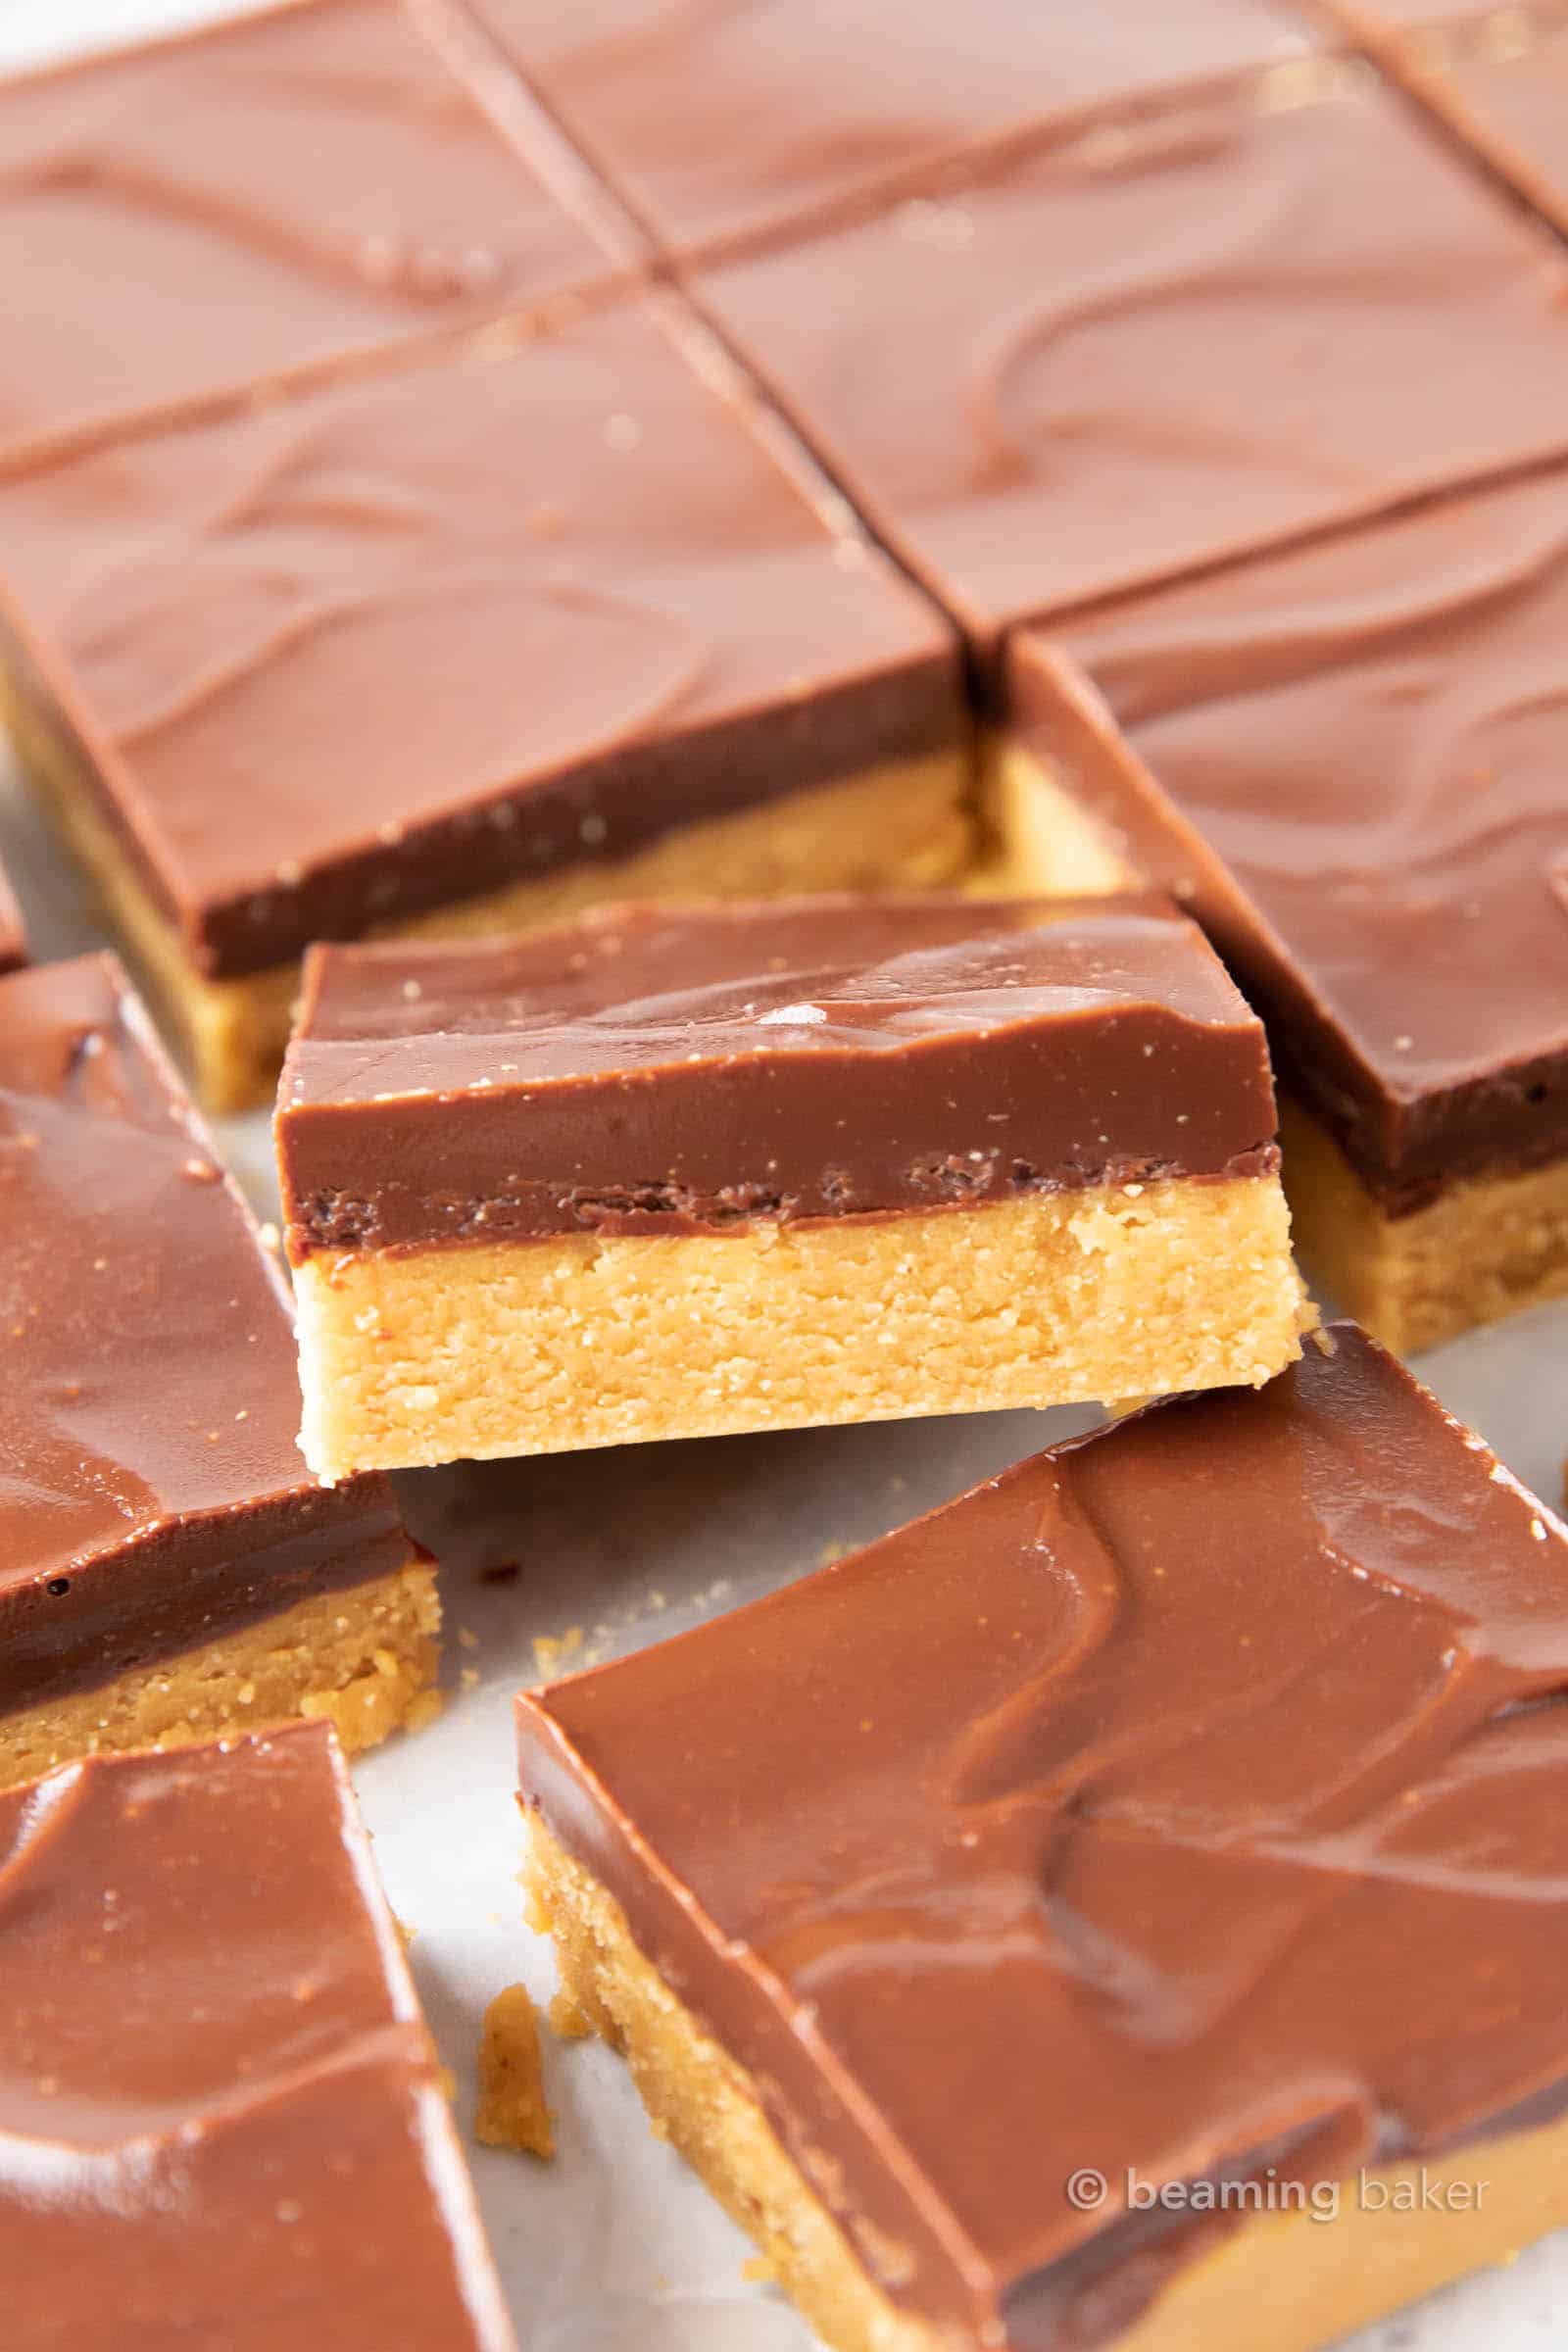 Keto Peanut Butter Bars: only 4 ingredients for soft ‘n dense no bake peanut butter bars topped with a thick layer of chocolate peanut butter. Sink your teeth into the best keto peanut butter chocolate bars! Like PB cups in bar form. #Keto #PeanutButter #LowCarb #Ketogenic #Chocolate | Recipe at BeamingBaker.com